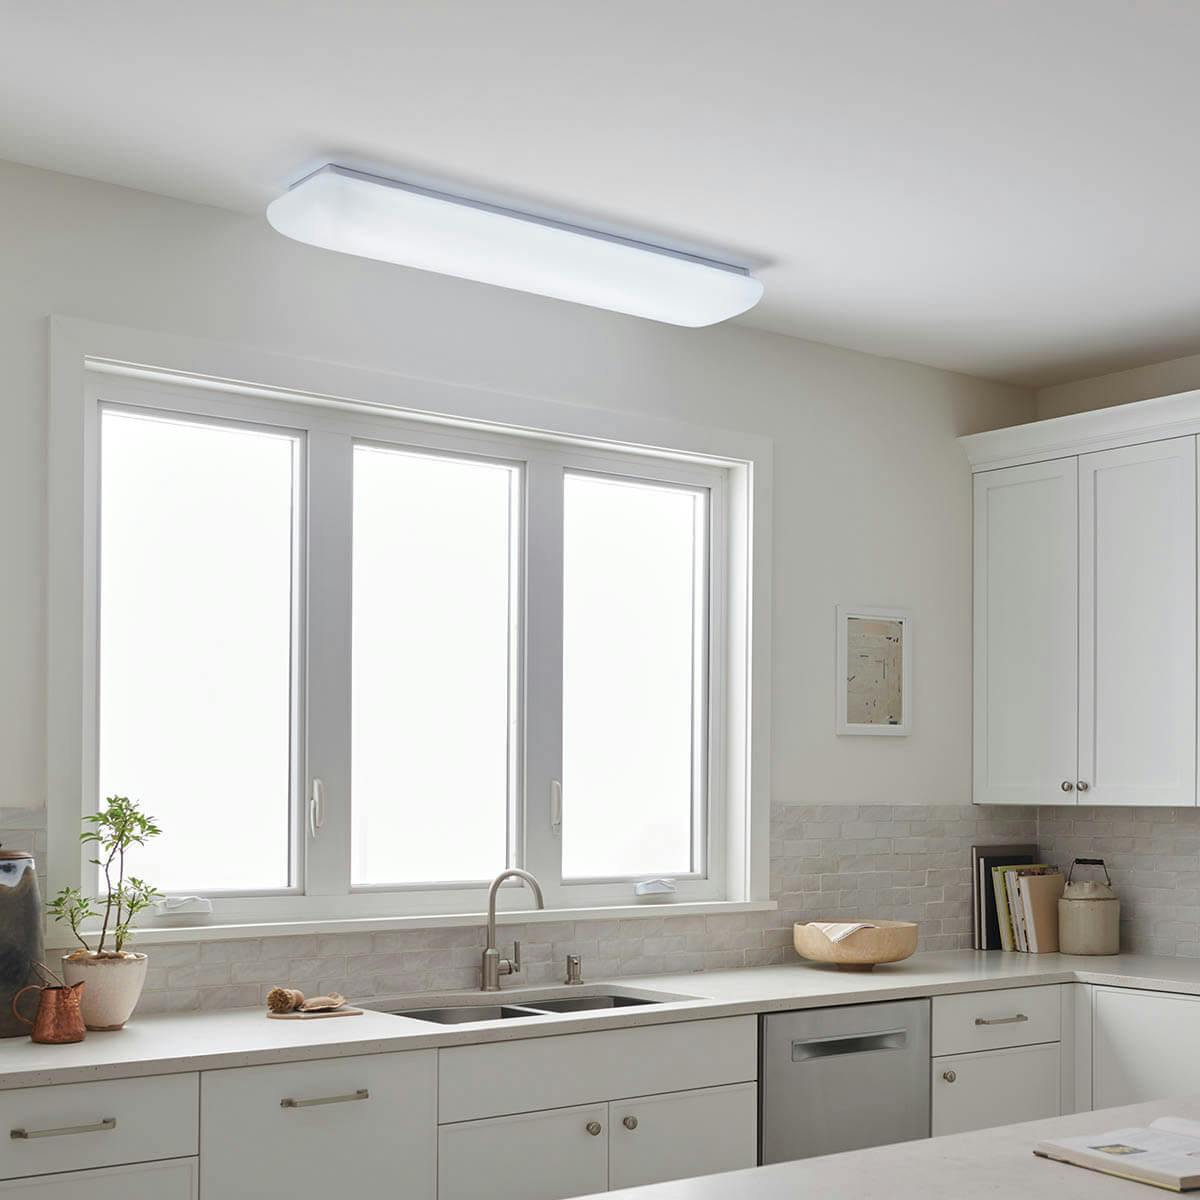 Day time kitchen with 50" 2 Light Fluorescent Linear Ceiling Light in White